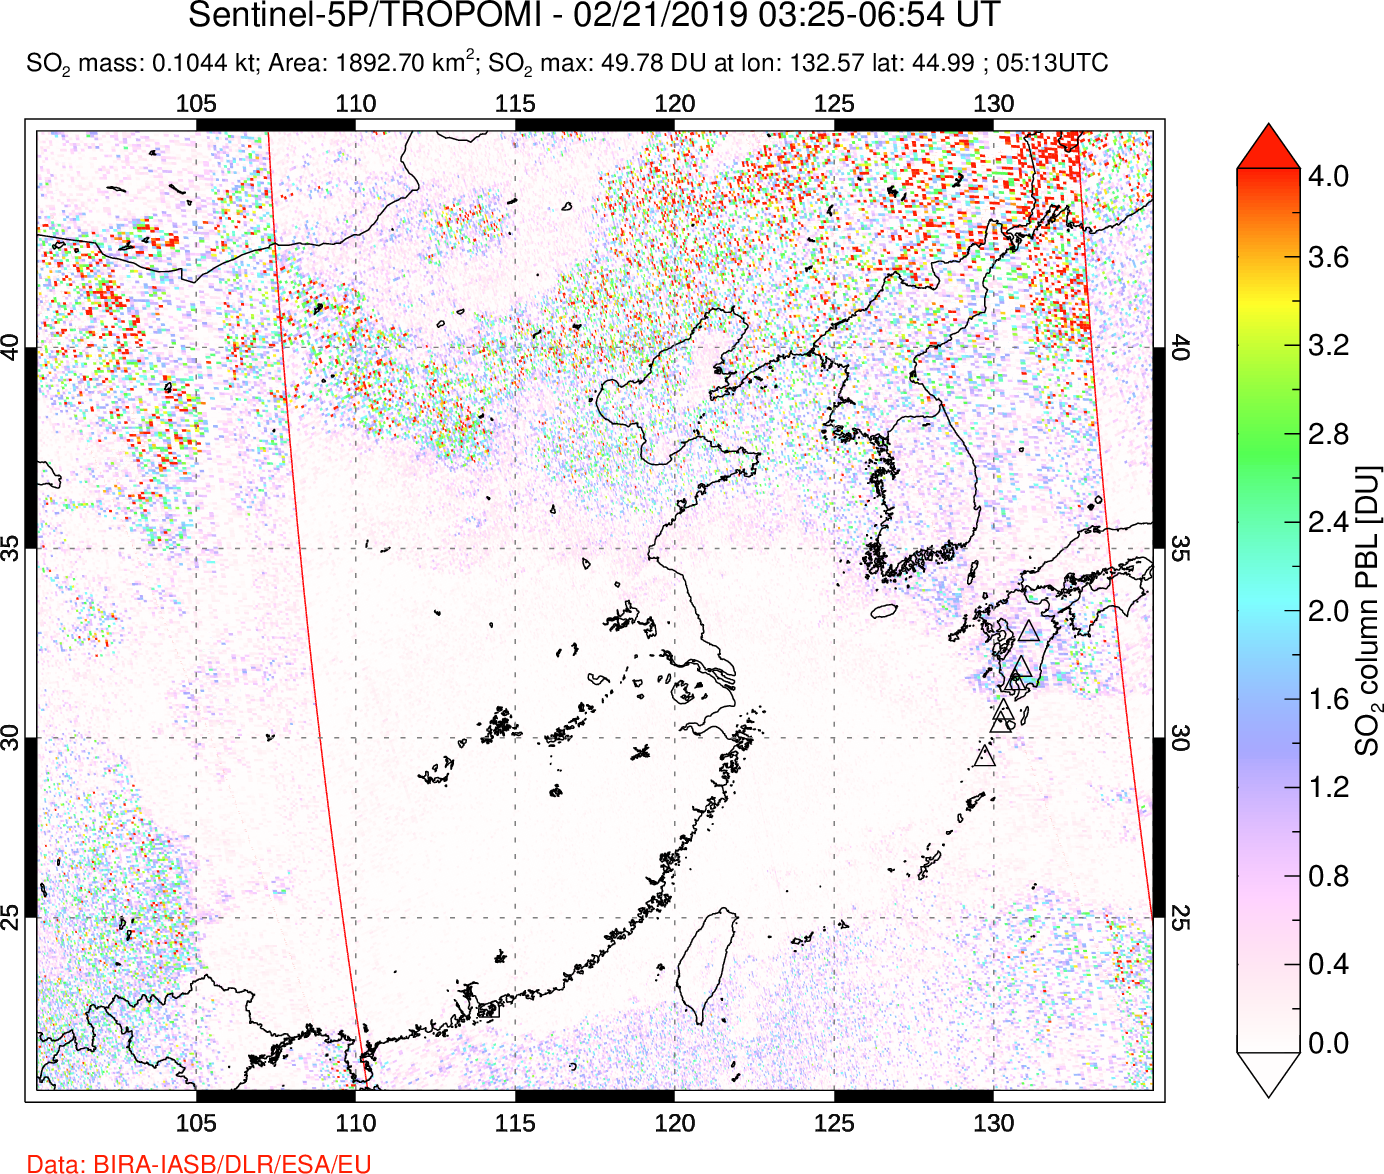 A sulfur dioxide image over Eastern China on Feb 21, 2019.